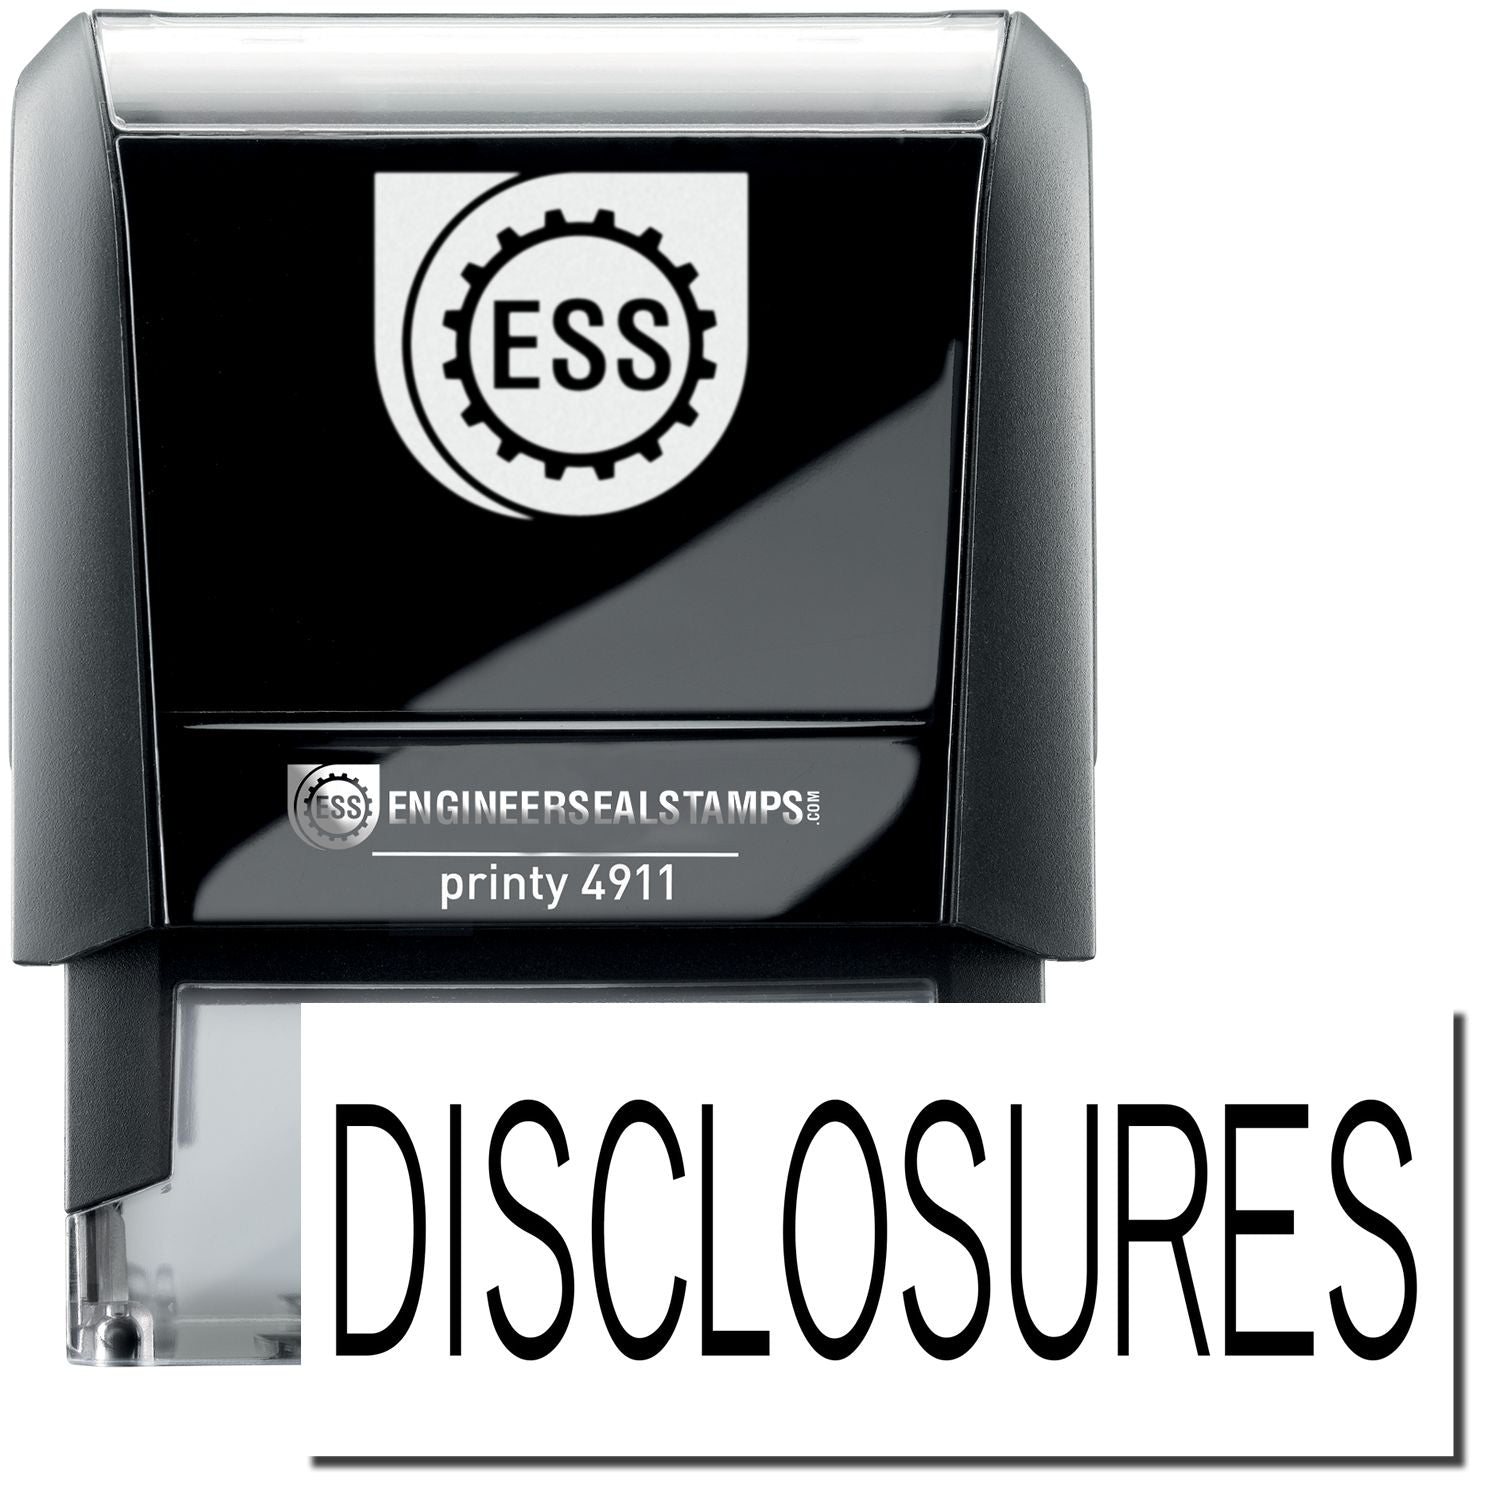 A self-inking stamp with a stamped image showing how the text "DISCLOSURES" is displayed after stamping.